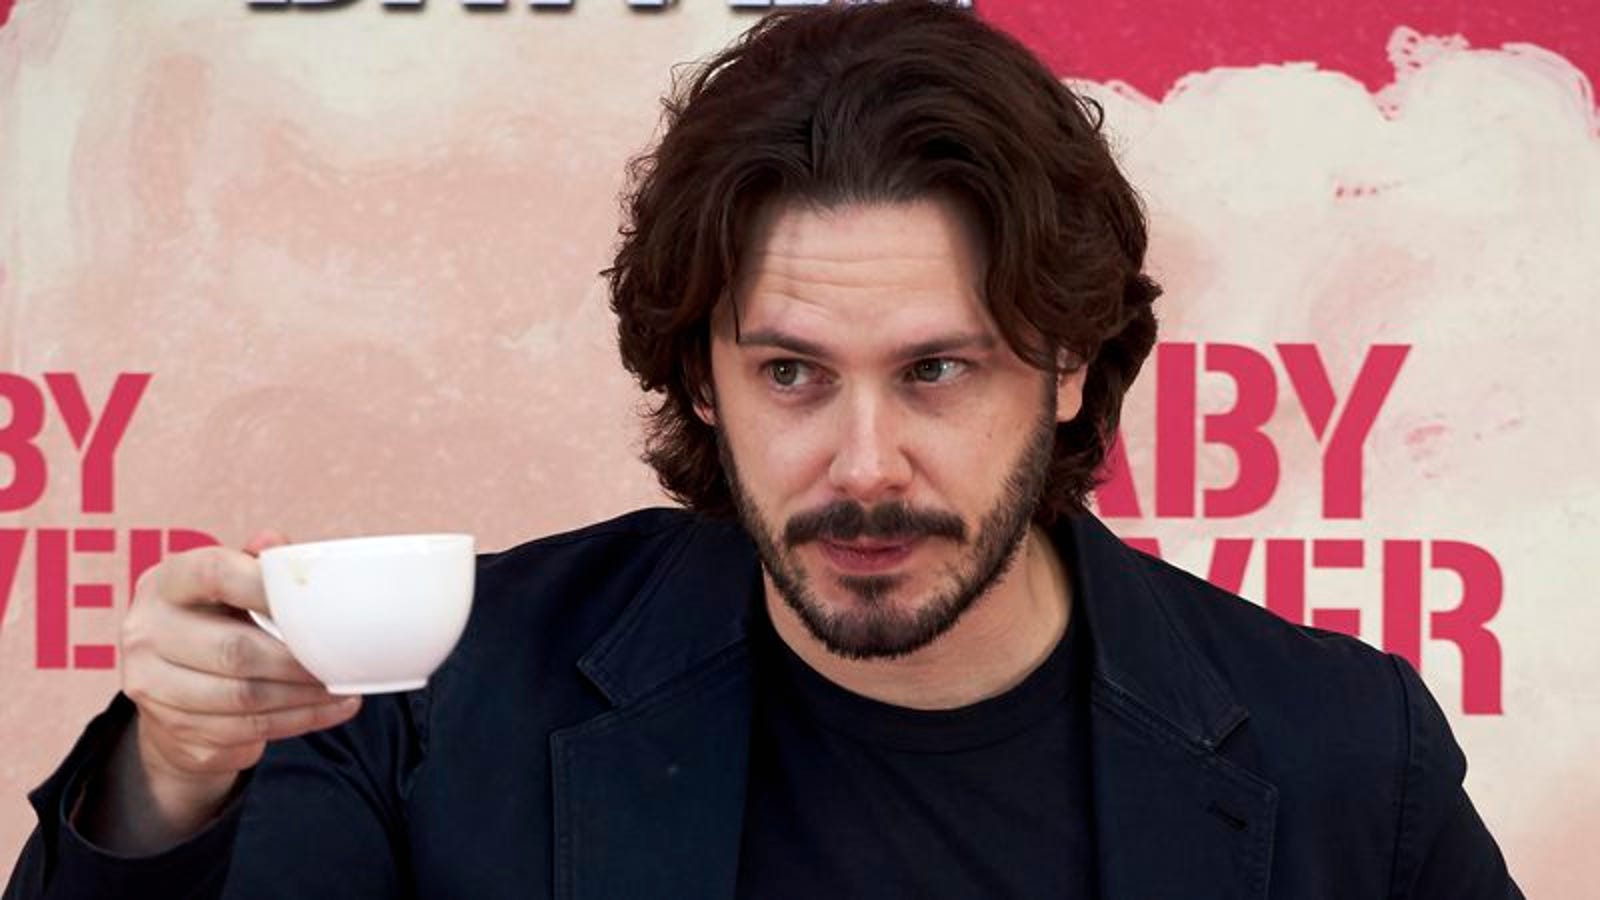 Edgar Wright finally opens up about why he left Ant-Man